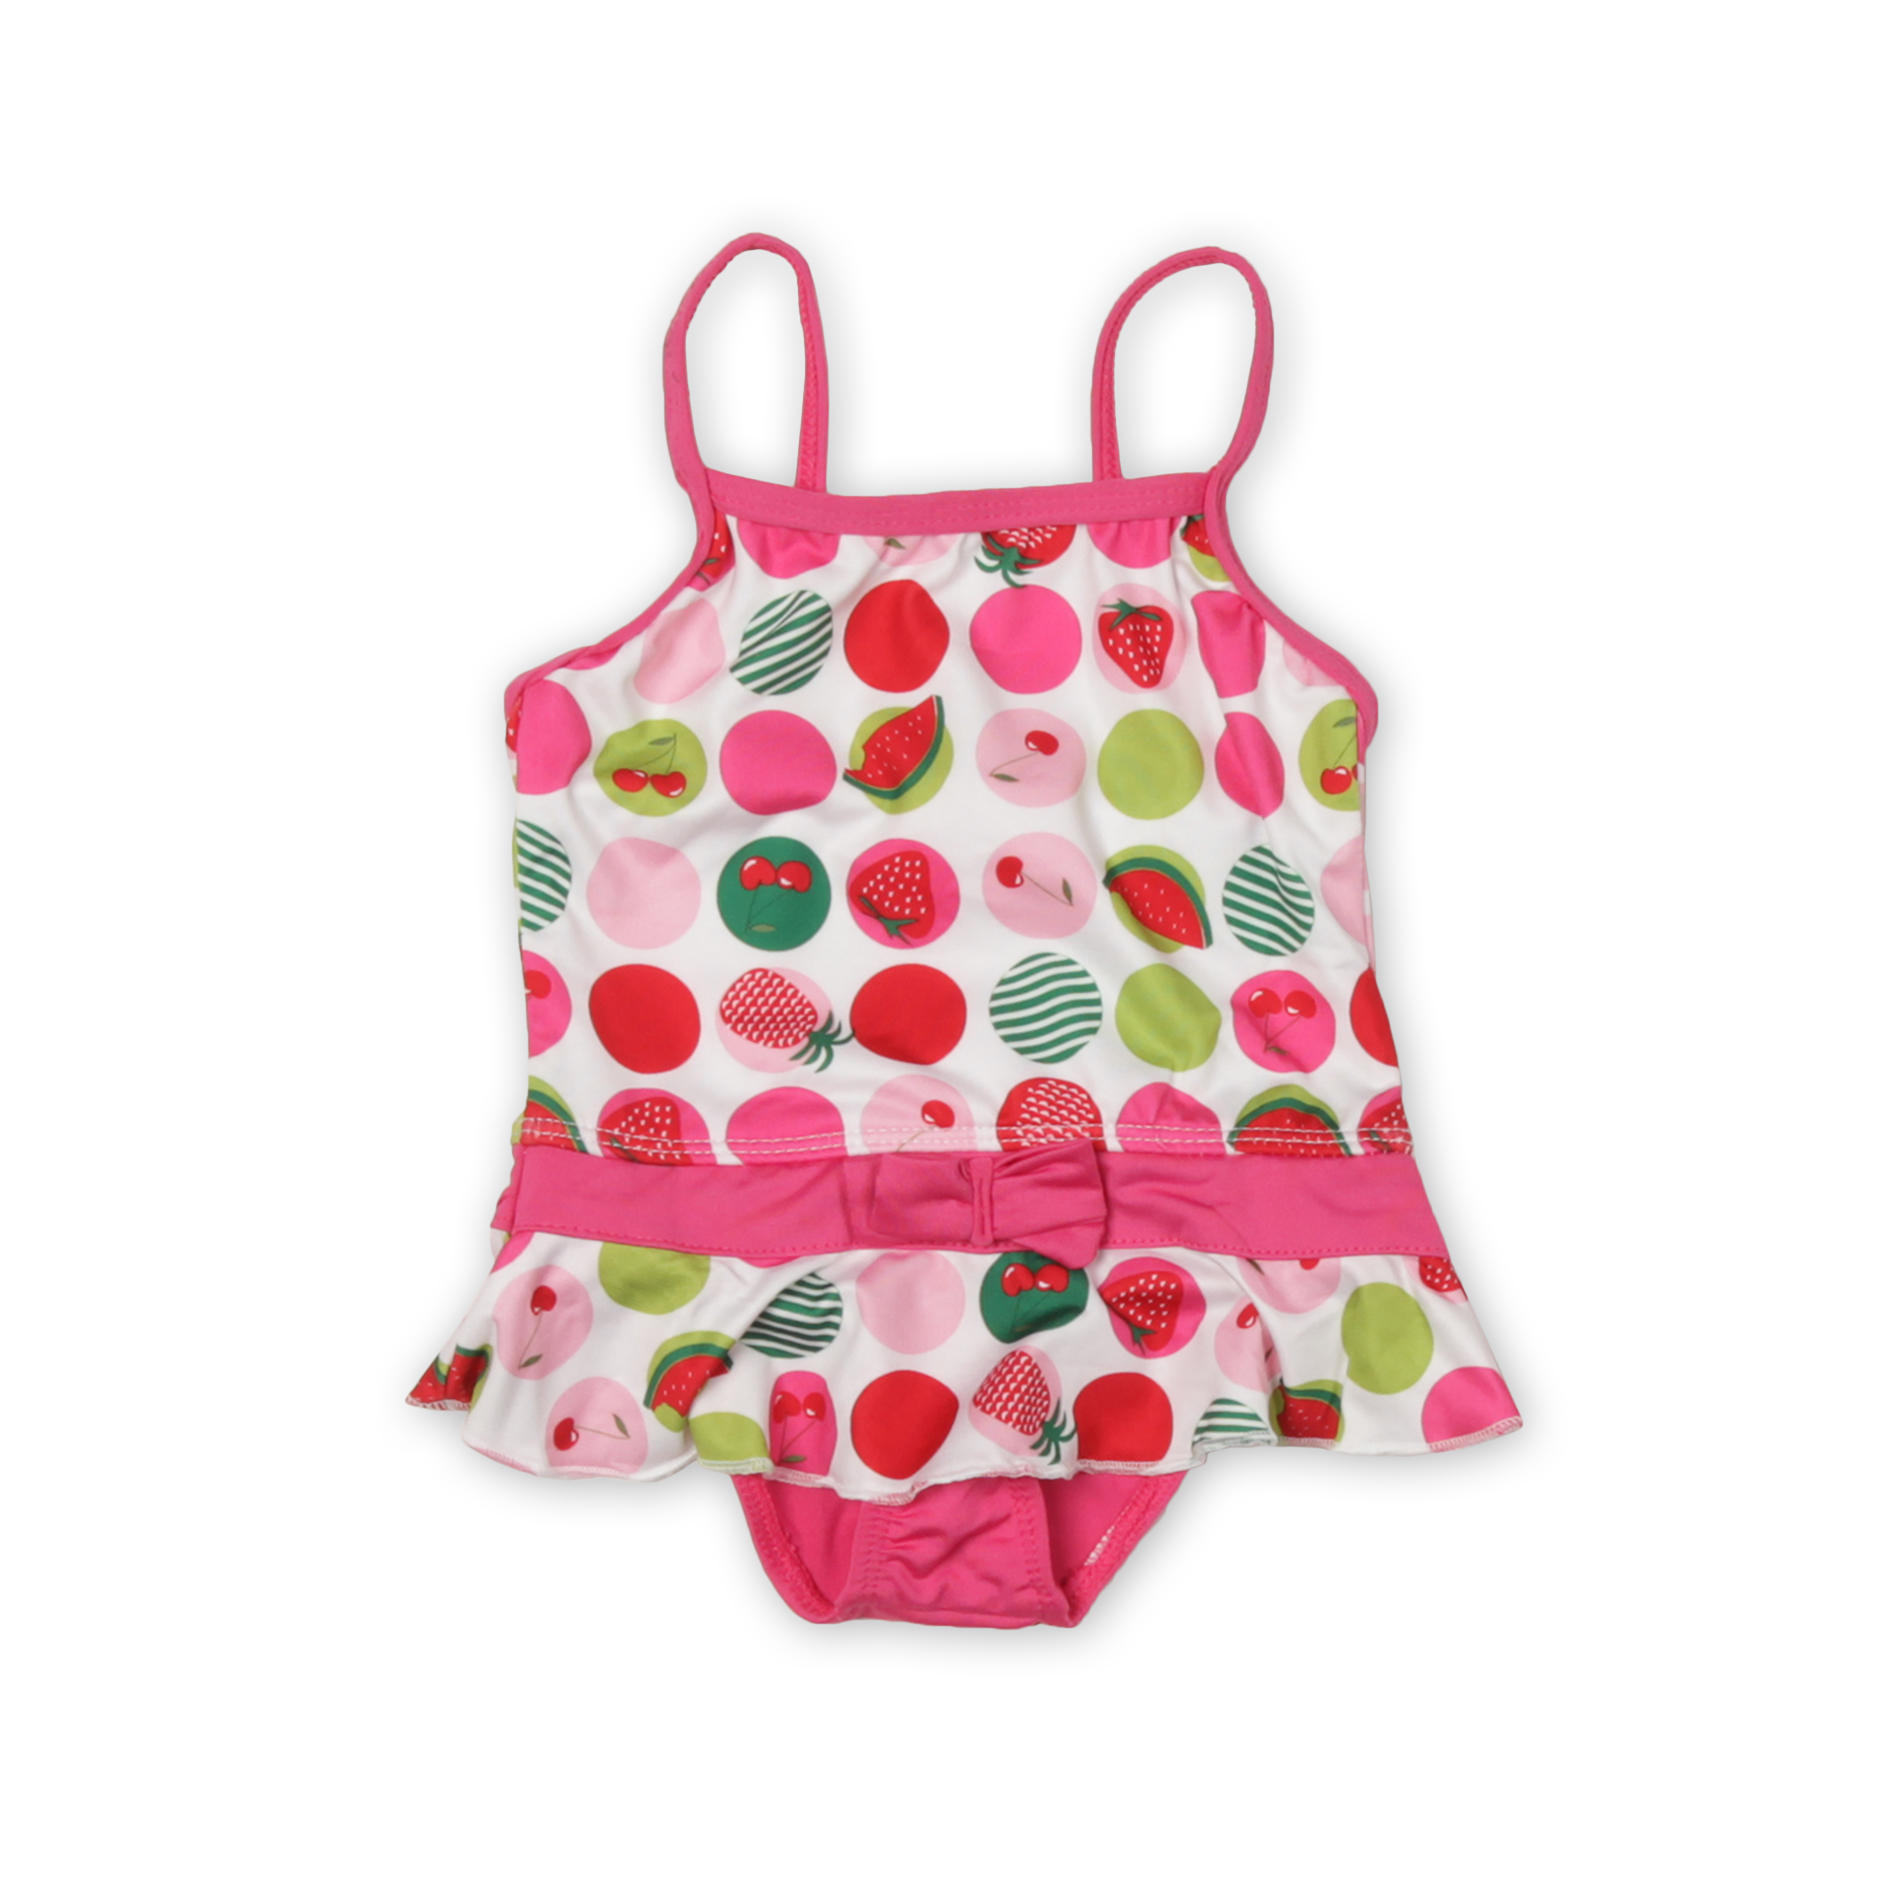 Pink Platinum Infant Girl's Skirted One-Piece Swimsuit - Fruit Dots